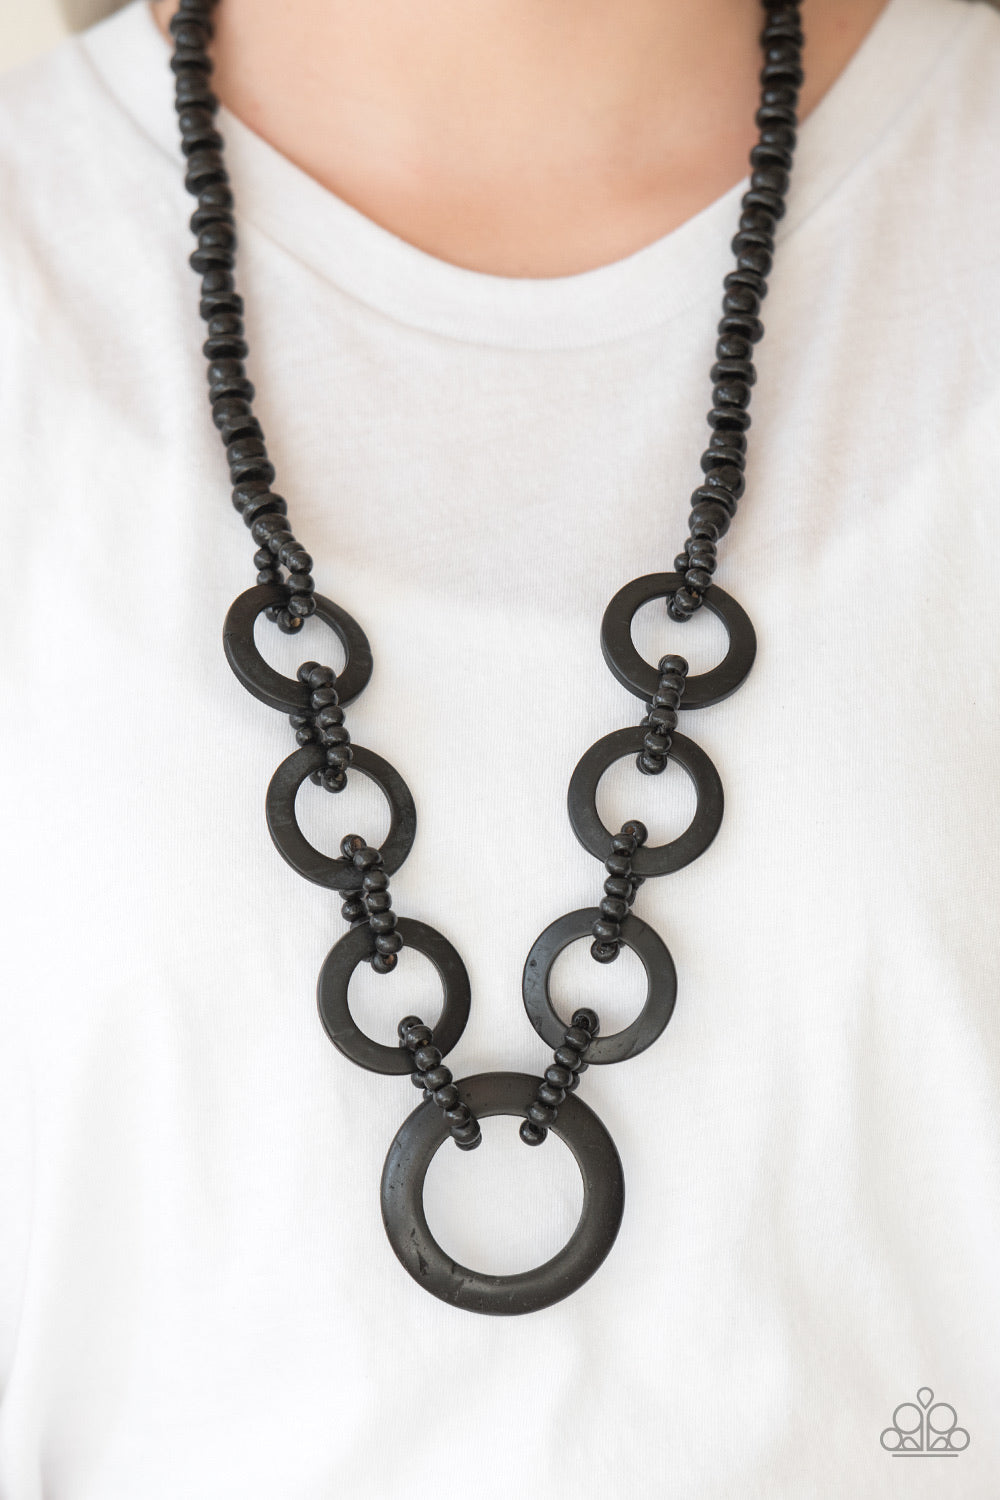 Paparazzi Accessories  - Endless Summer - #N171 Black Necklace